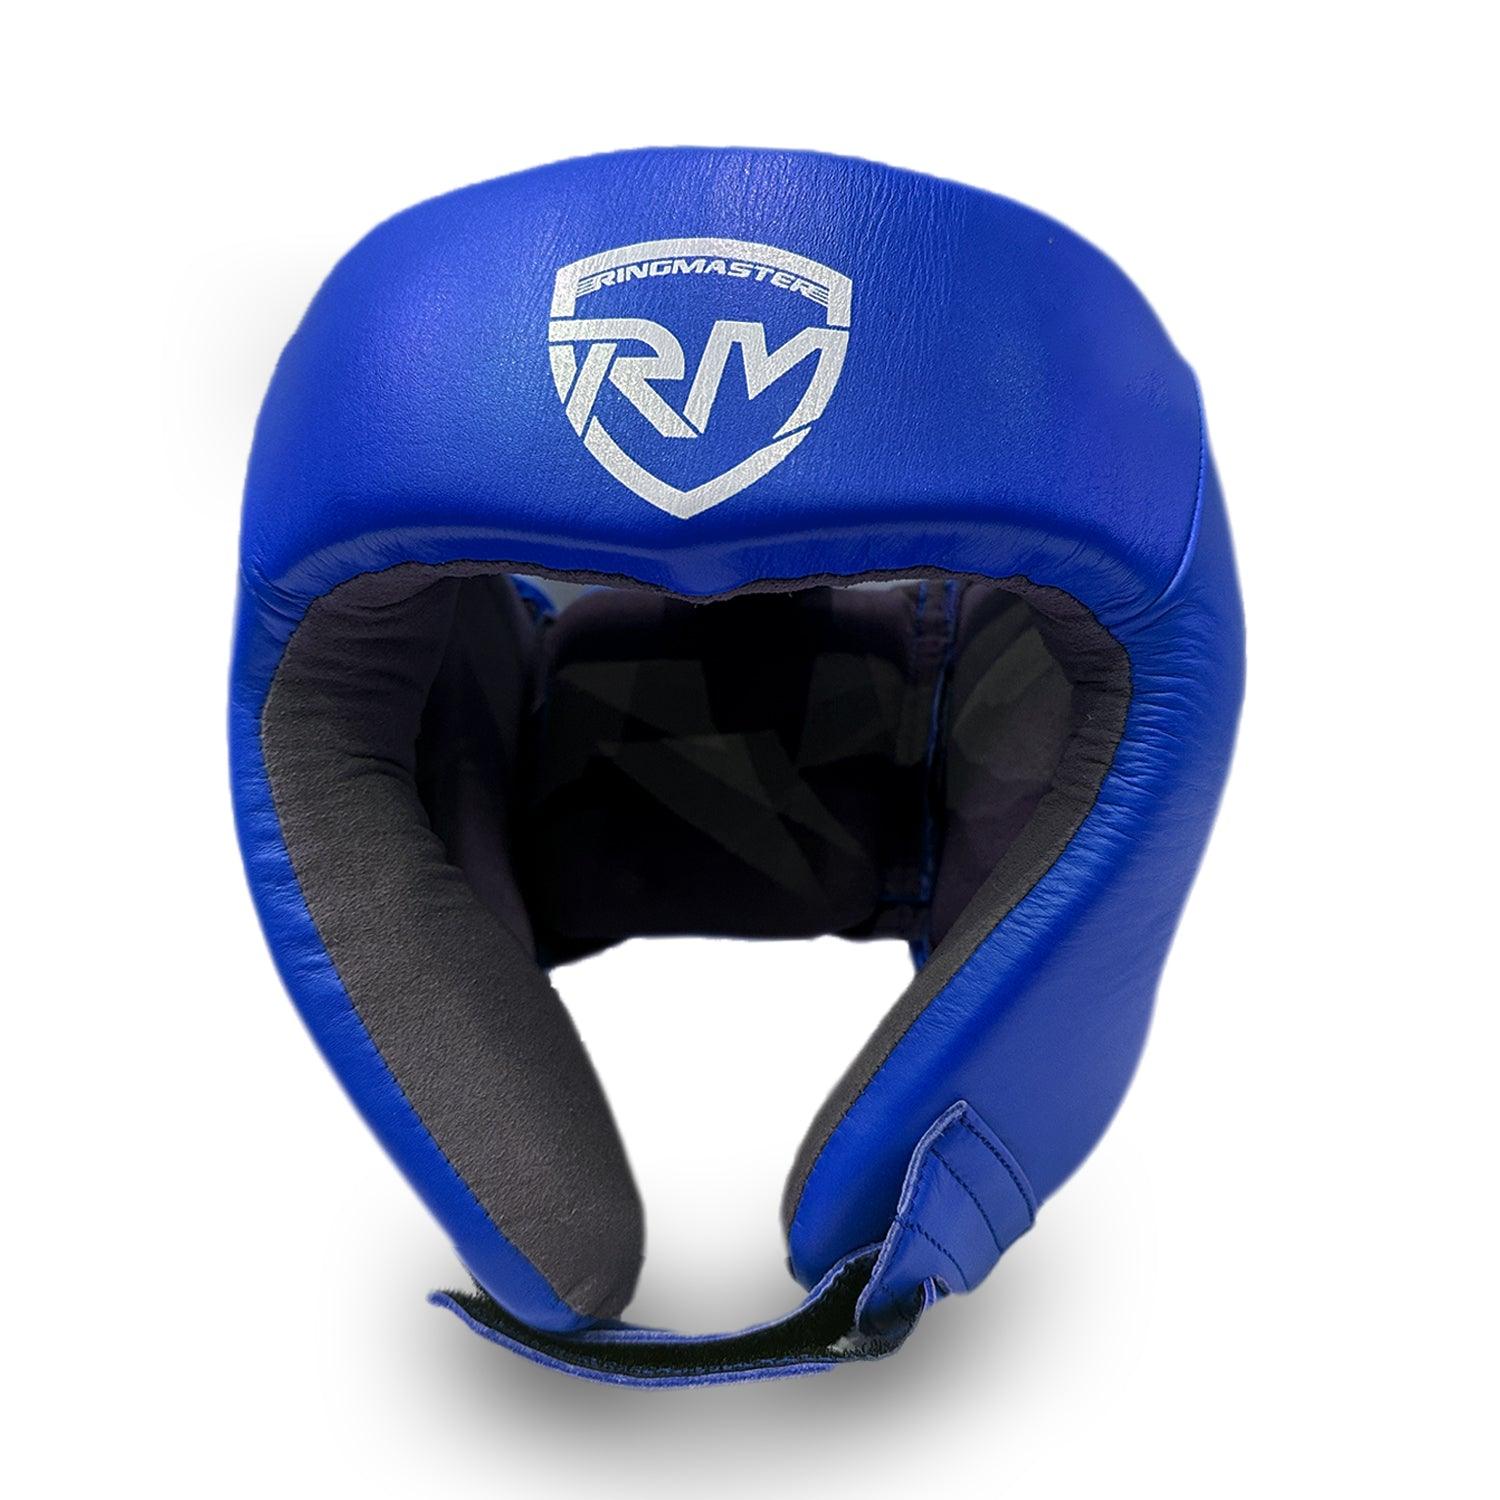 Ringmaster Head guard Boxing, Best boxing head guard, boxing head guard uk, MMA head guard, boxing headgear, Martial Arts head guard, boxing head guard open face, Boxing head guard for sale, face guard boxing, Blue Head guard Boxing, RingMaster Sports Open Face Boxing HeadGuard Synthetic Leather Blue Image 1